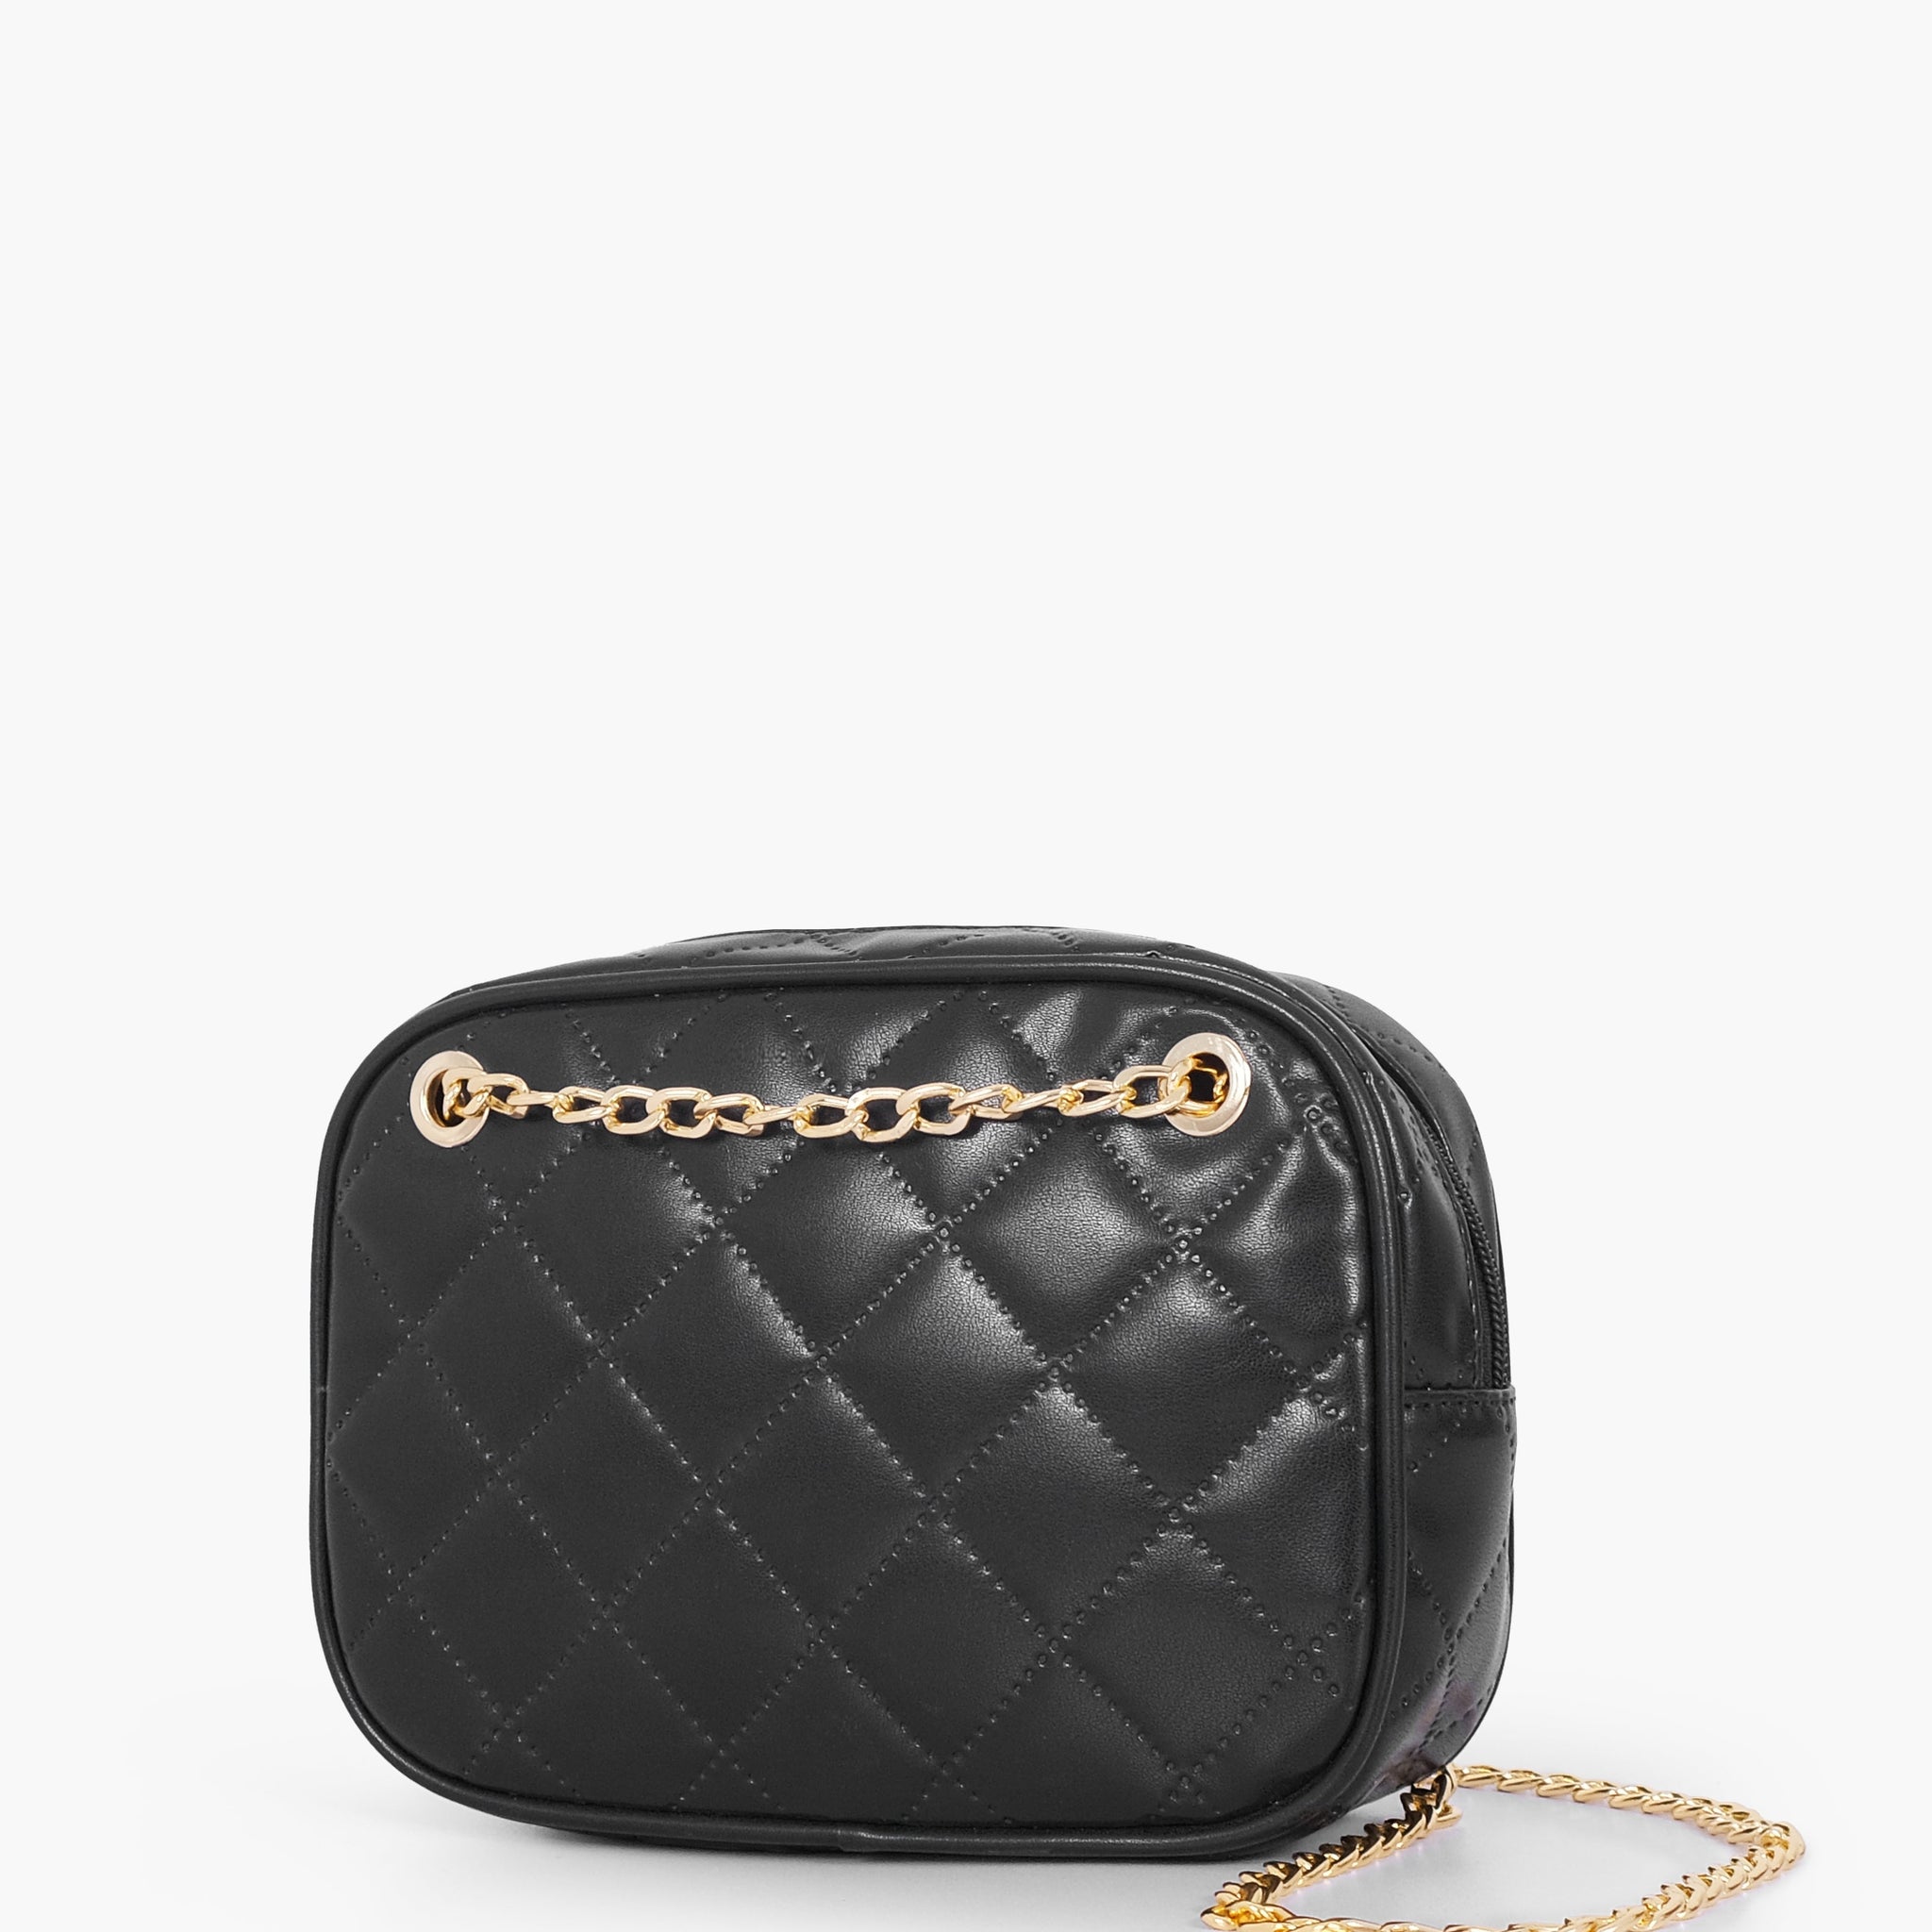 Buy Black Quilted Rectangle Cross Body Bag - Black in Pakistan